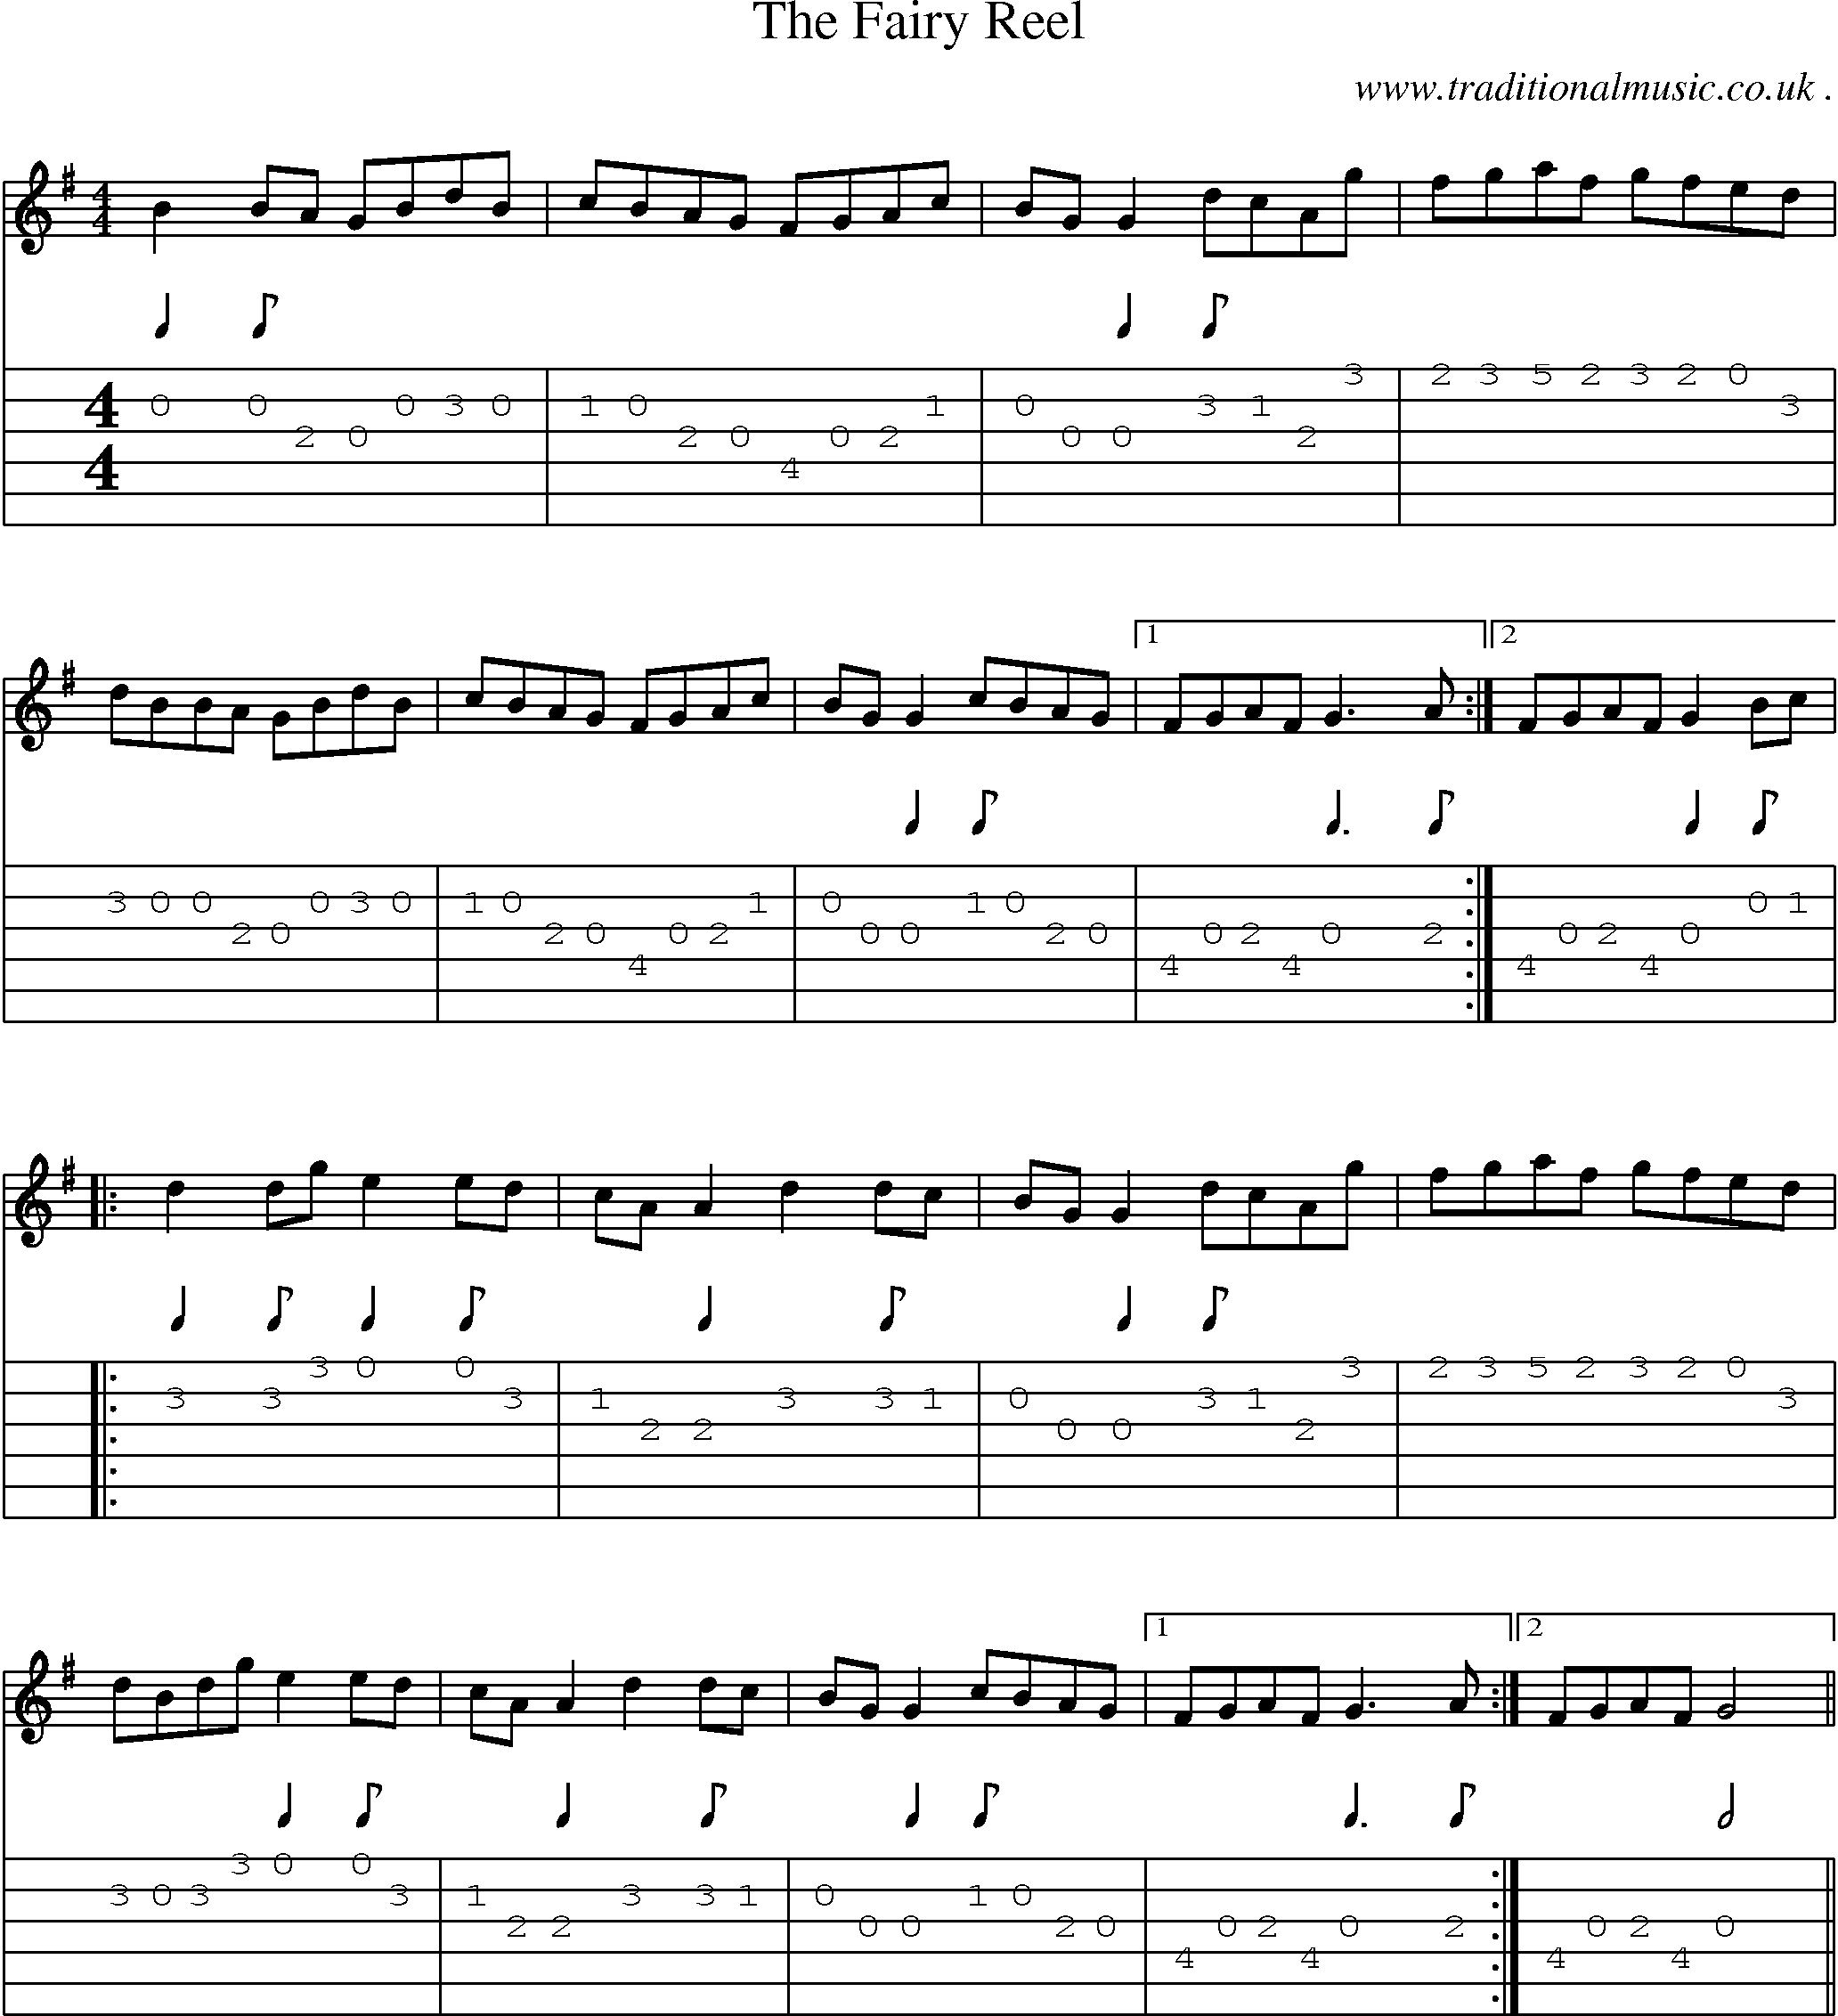 Sheet-Music and Guitar Tabs for The Fairy Reel